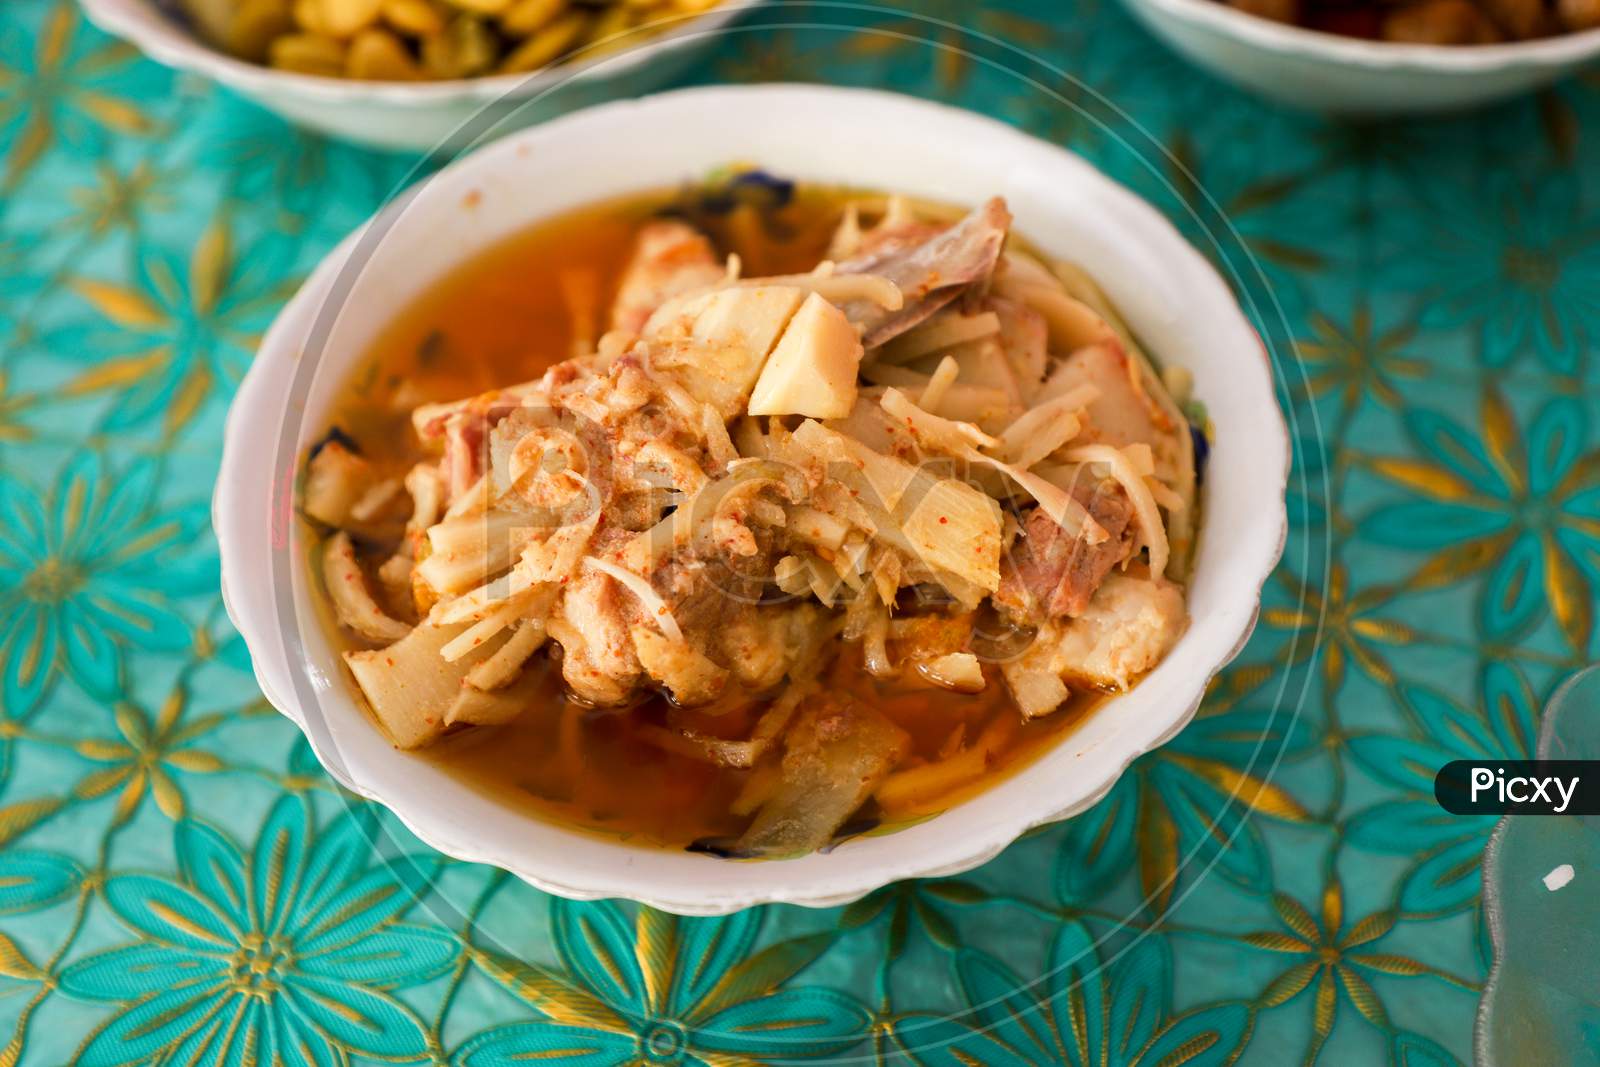 Burmese Dish Served in a Bowl